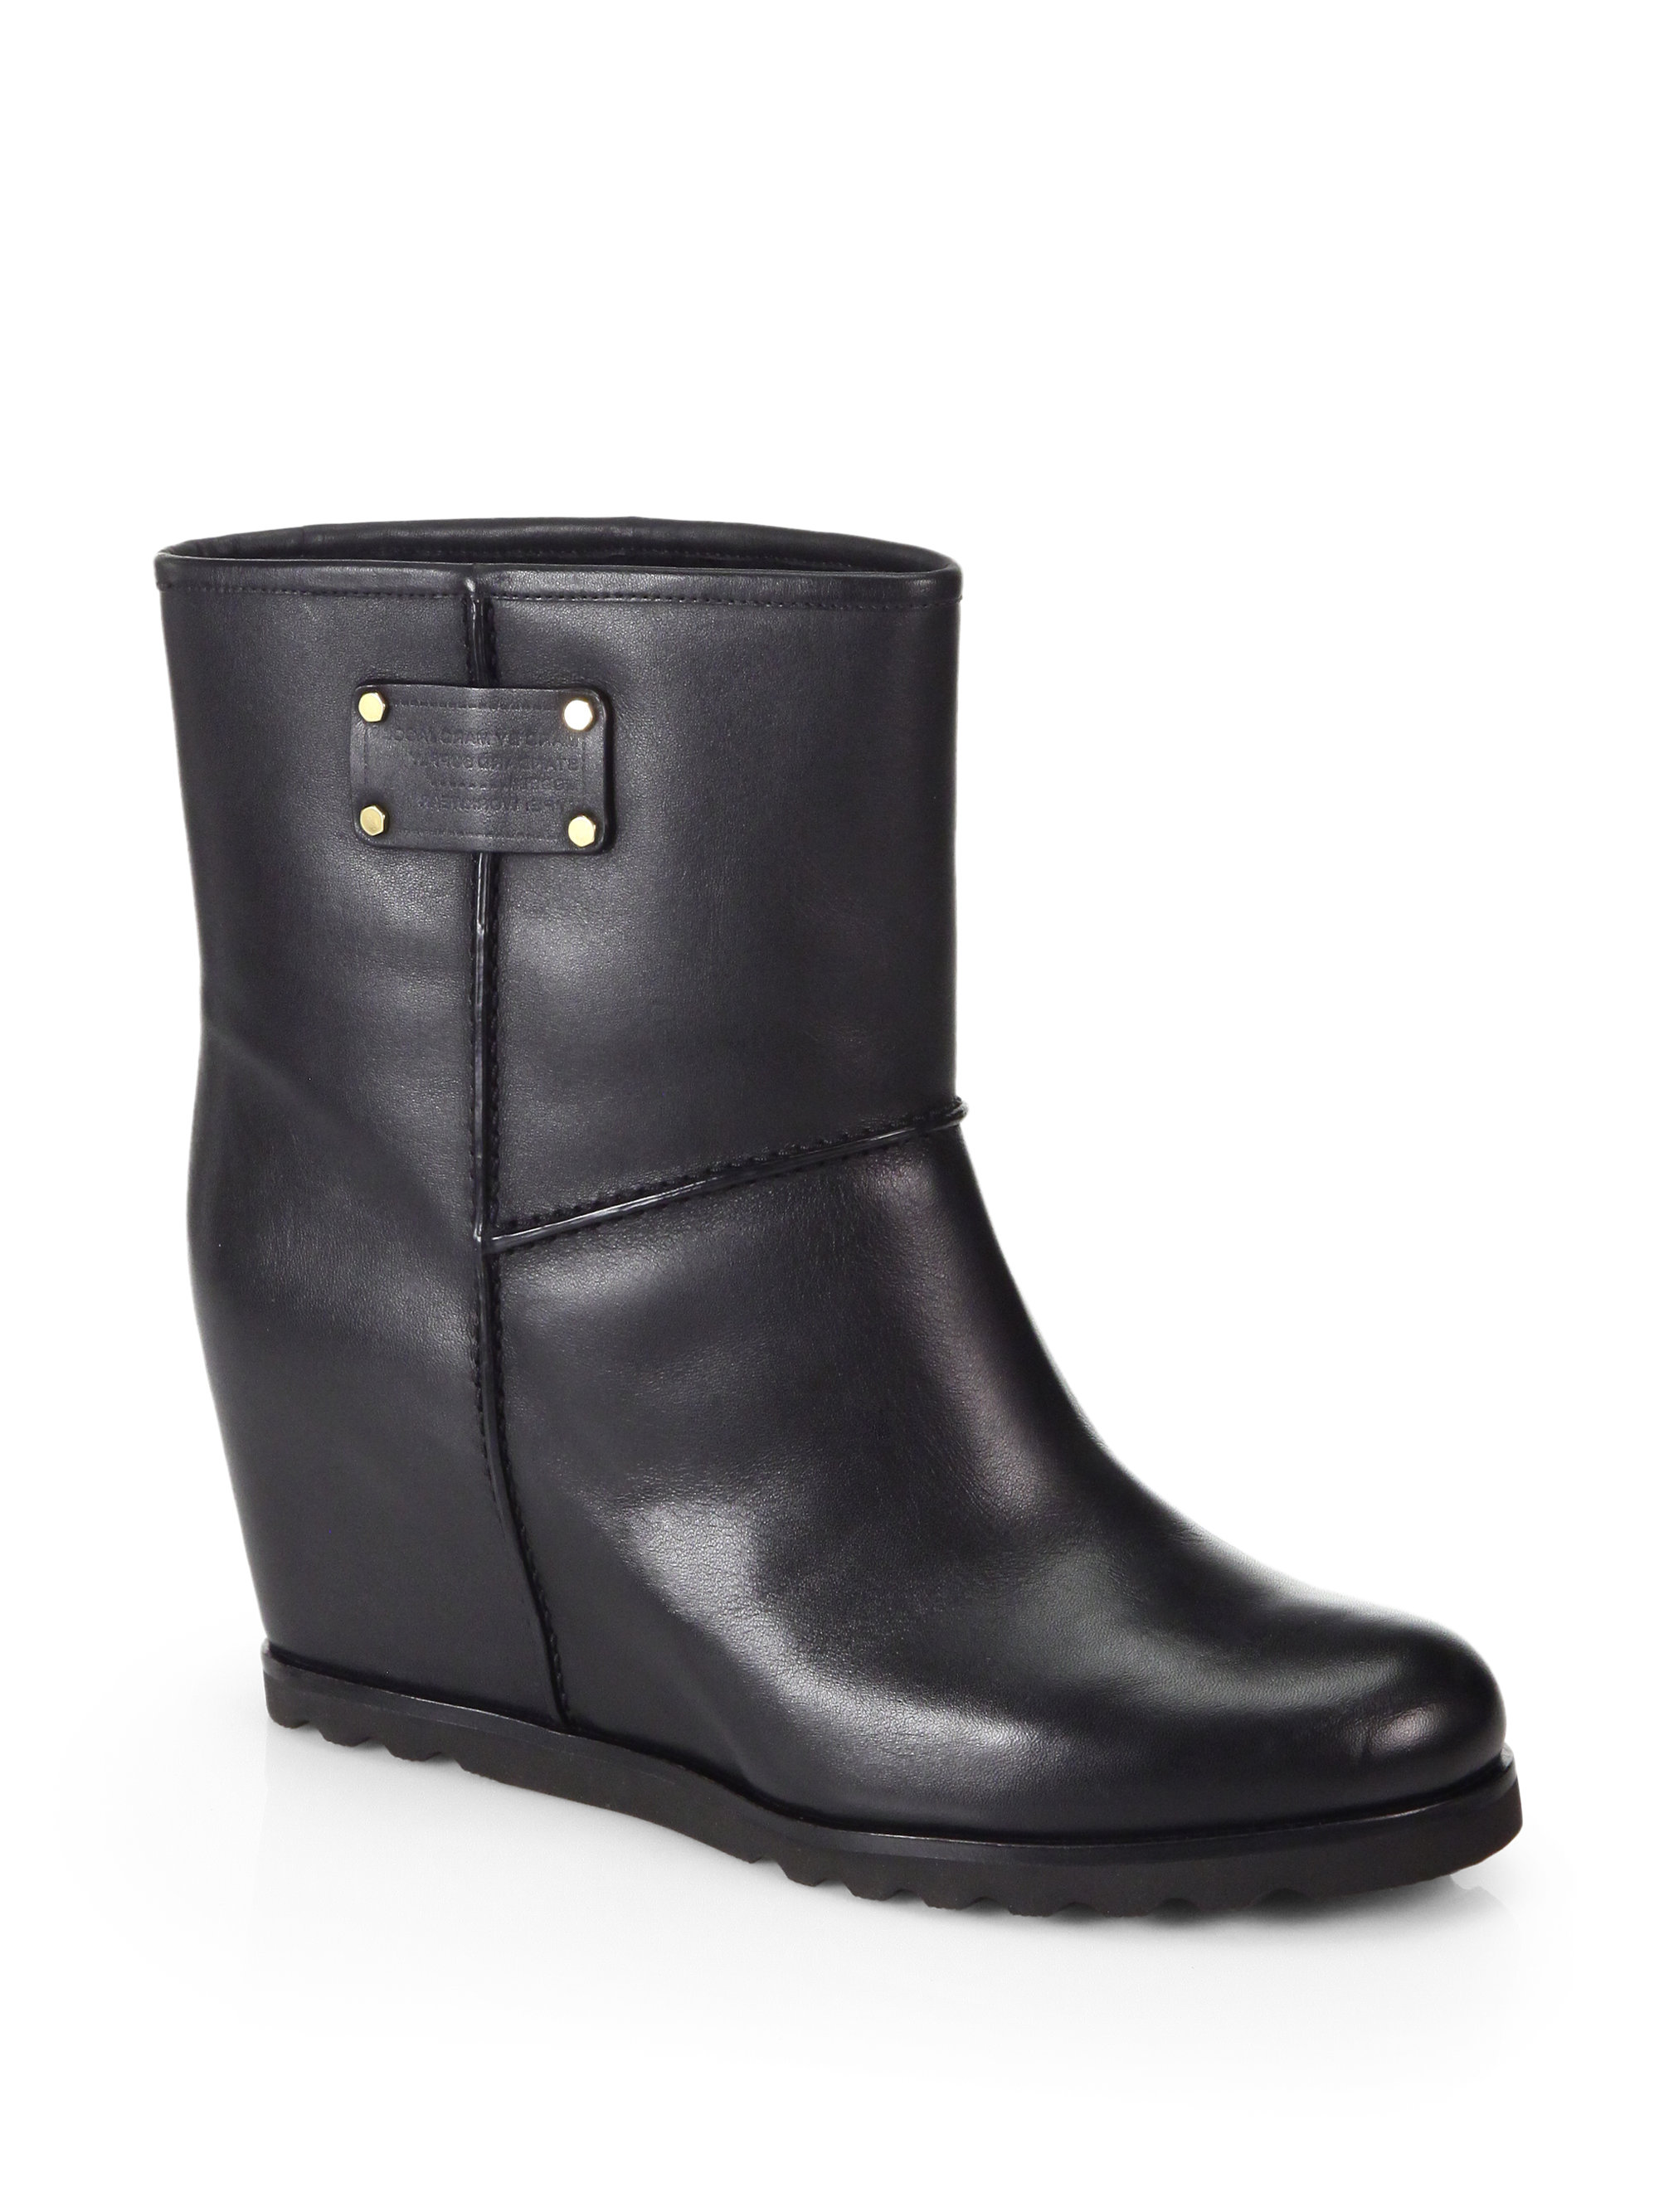 marc jacobs wedge boots